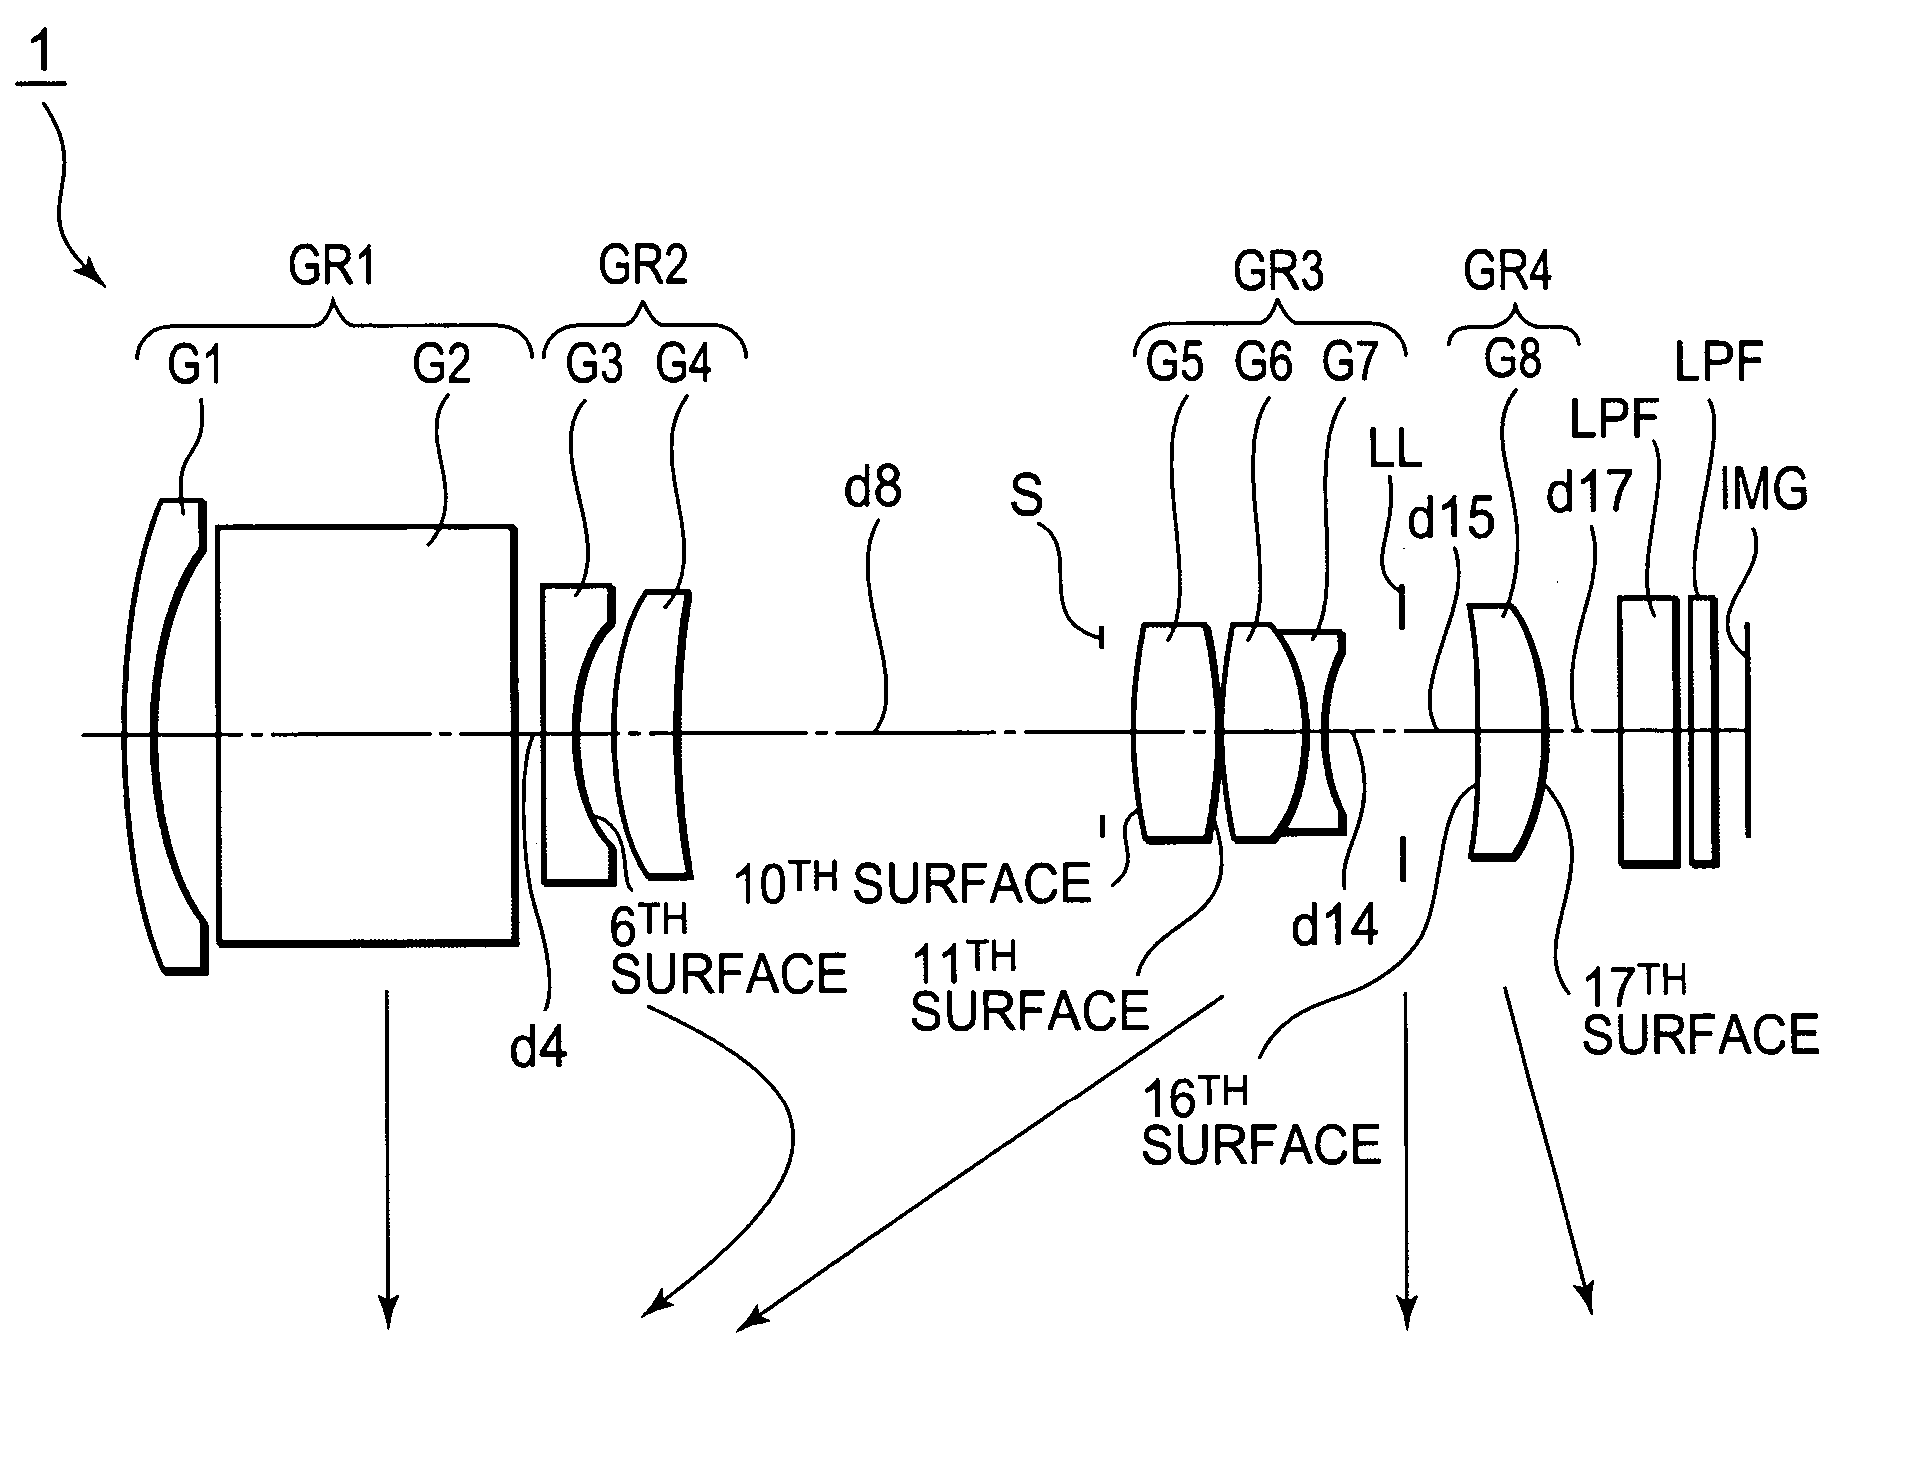 Zoom lens and imaging apparatus